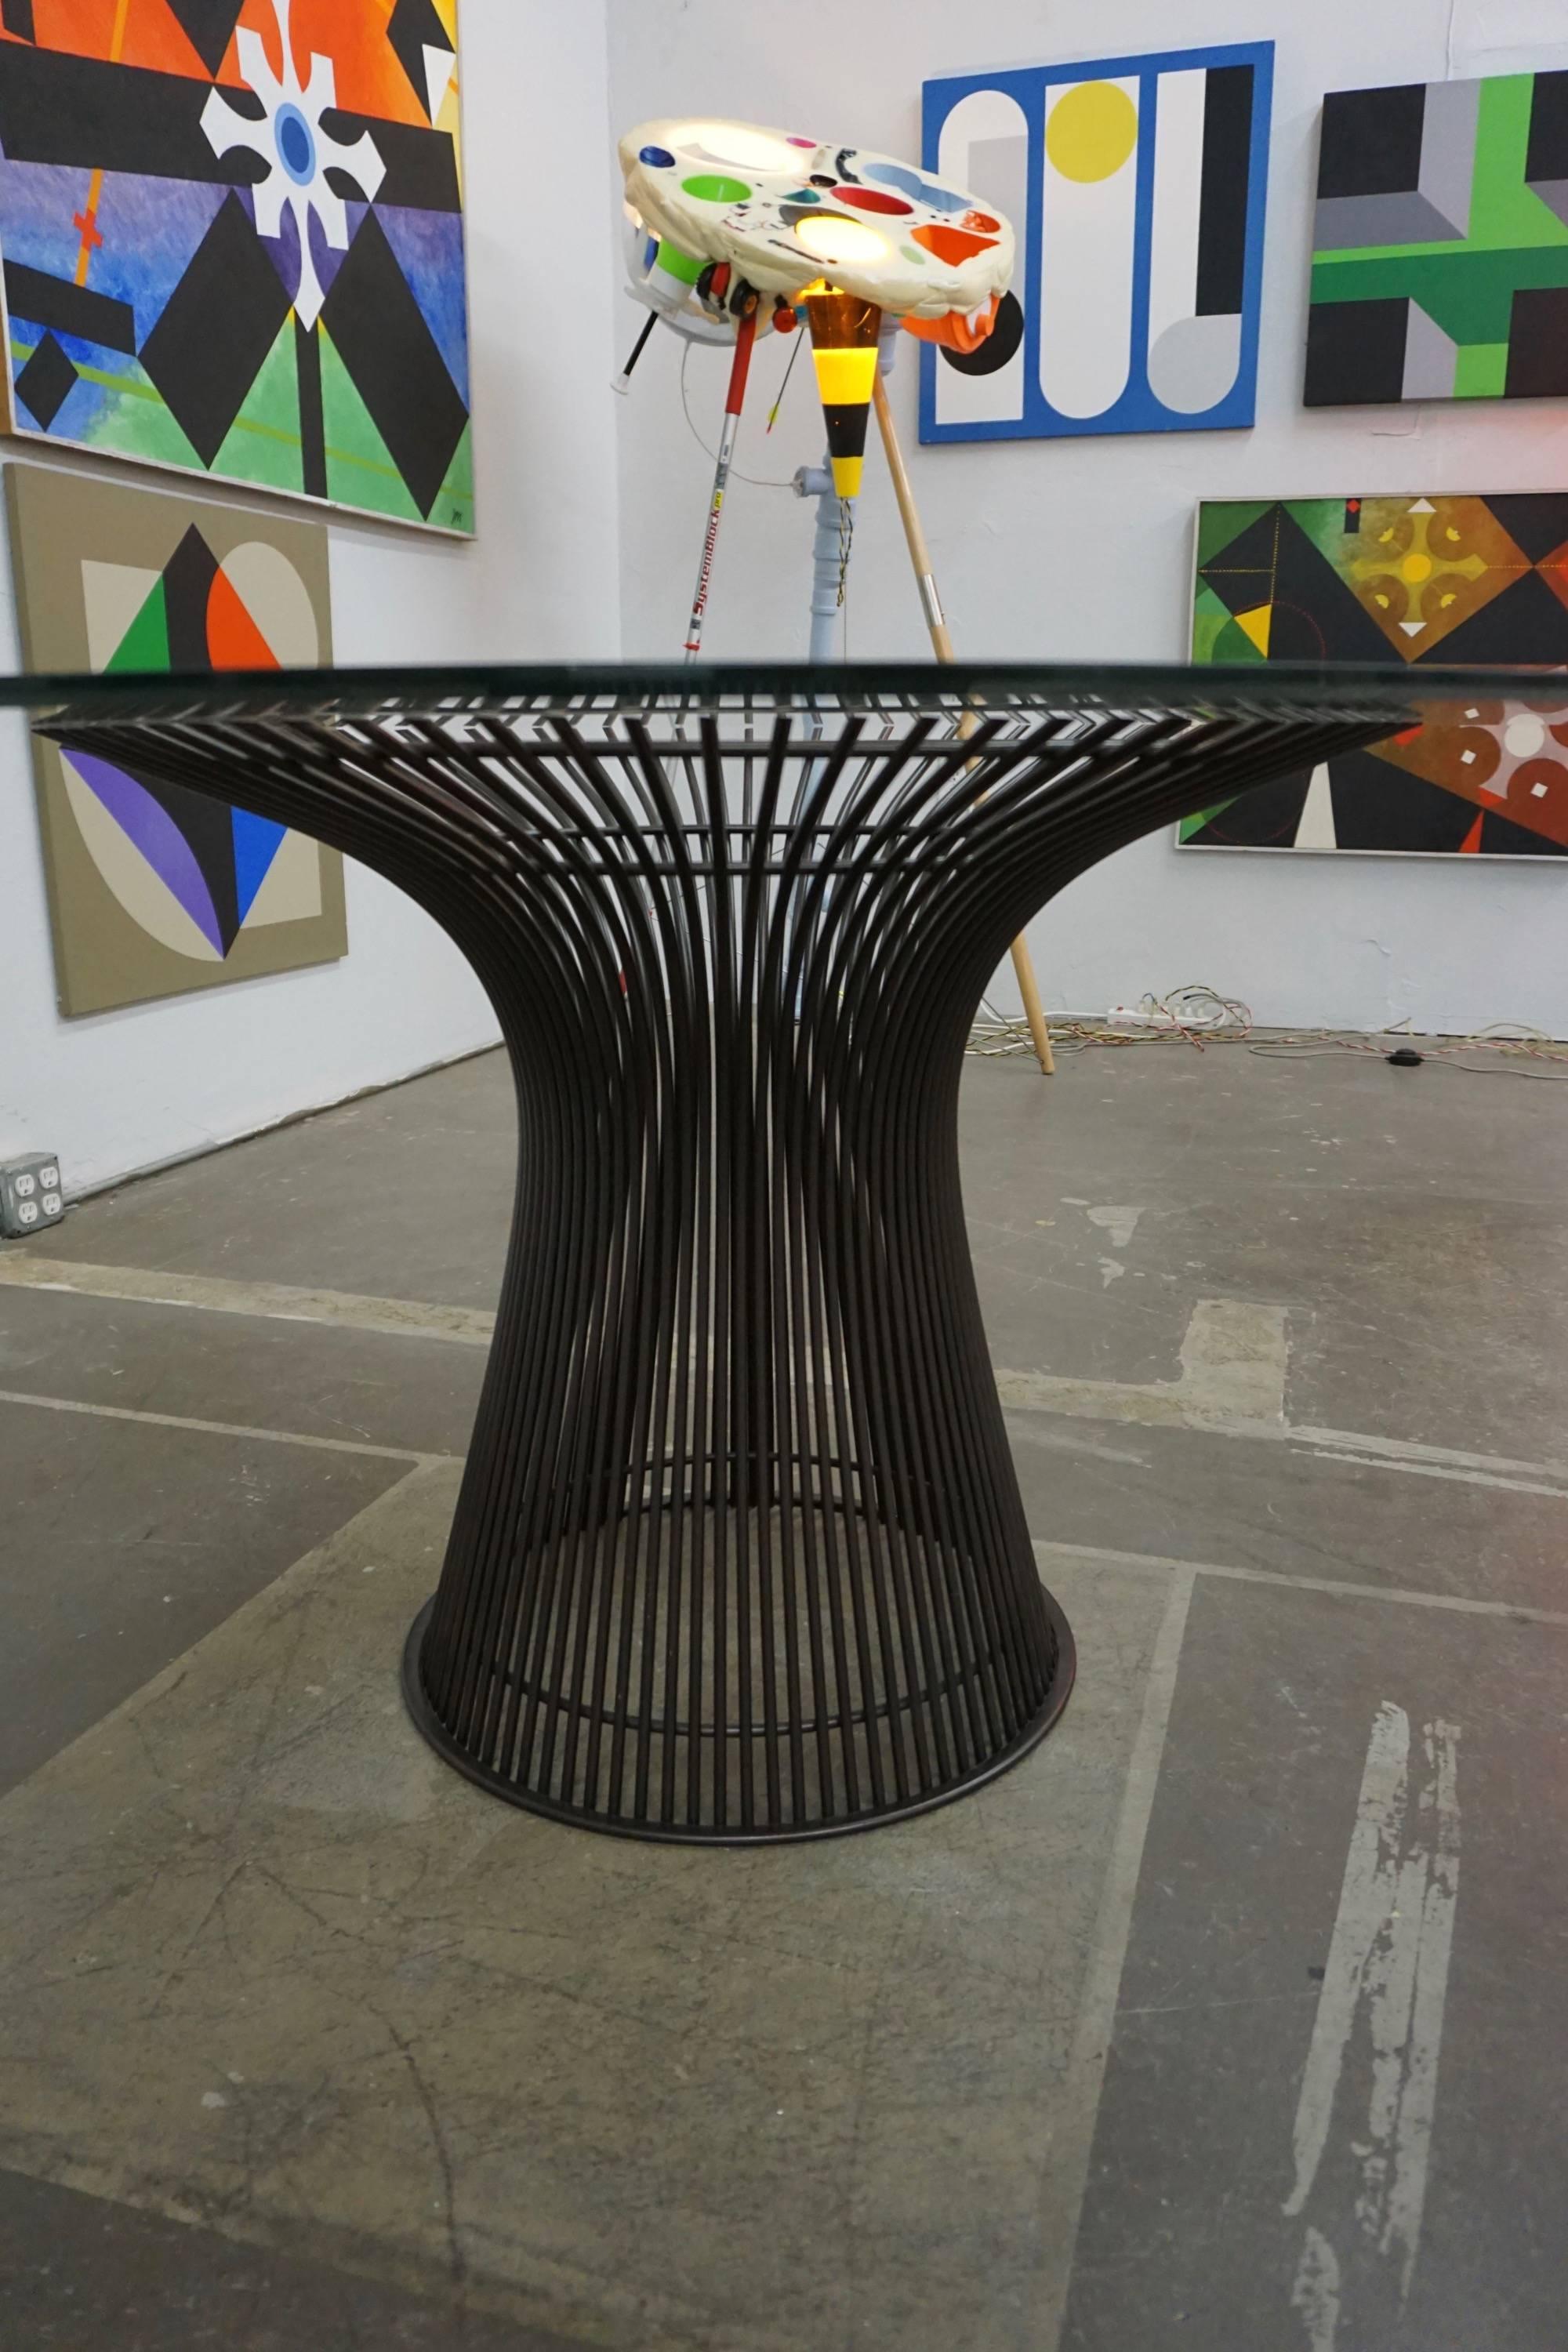 Designed by Platner in 1966 and manufacture by Knoll. The base has a bronze finish and the glass top measures 54